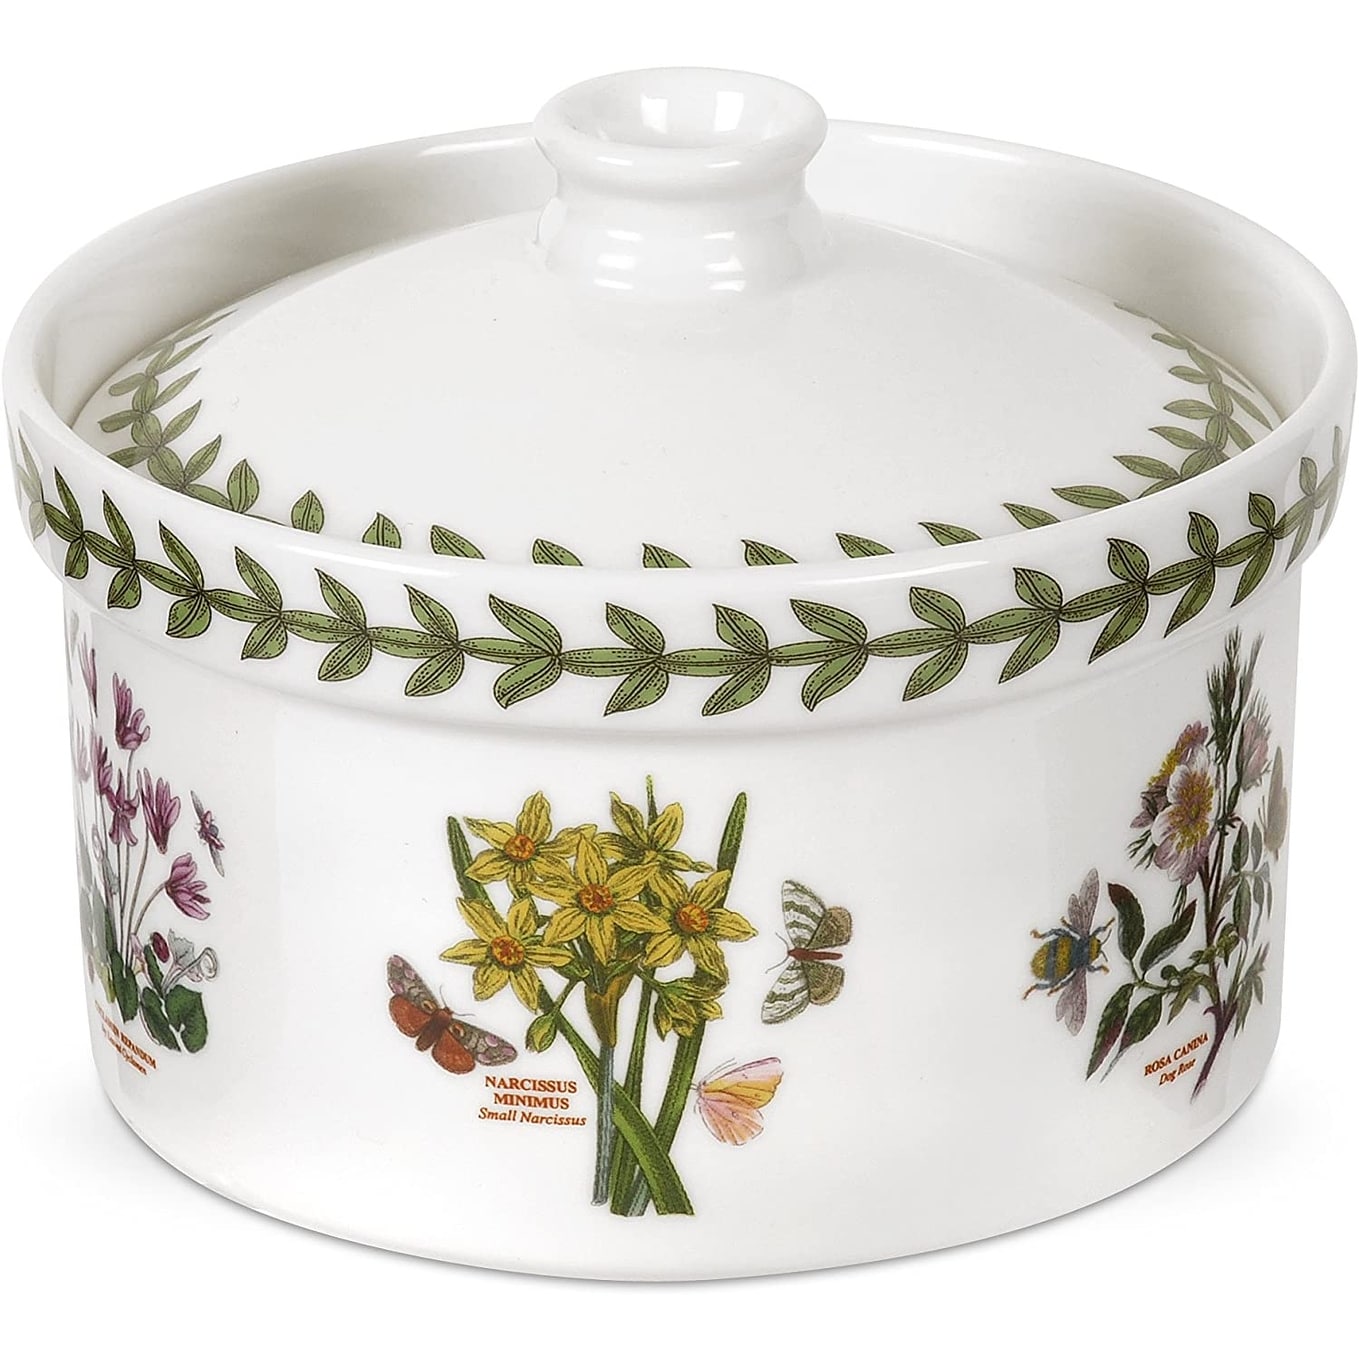 https://ak1.ostkcdn.com/images/products/is/images/direct/9947a3357aafe20e1390e905660cea045028c36b/Portmeirion-Botanic-Garden-Individual-Covered-Casserole.jpg